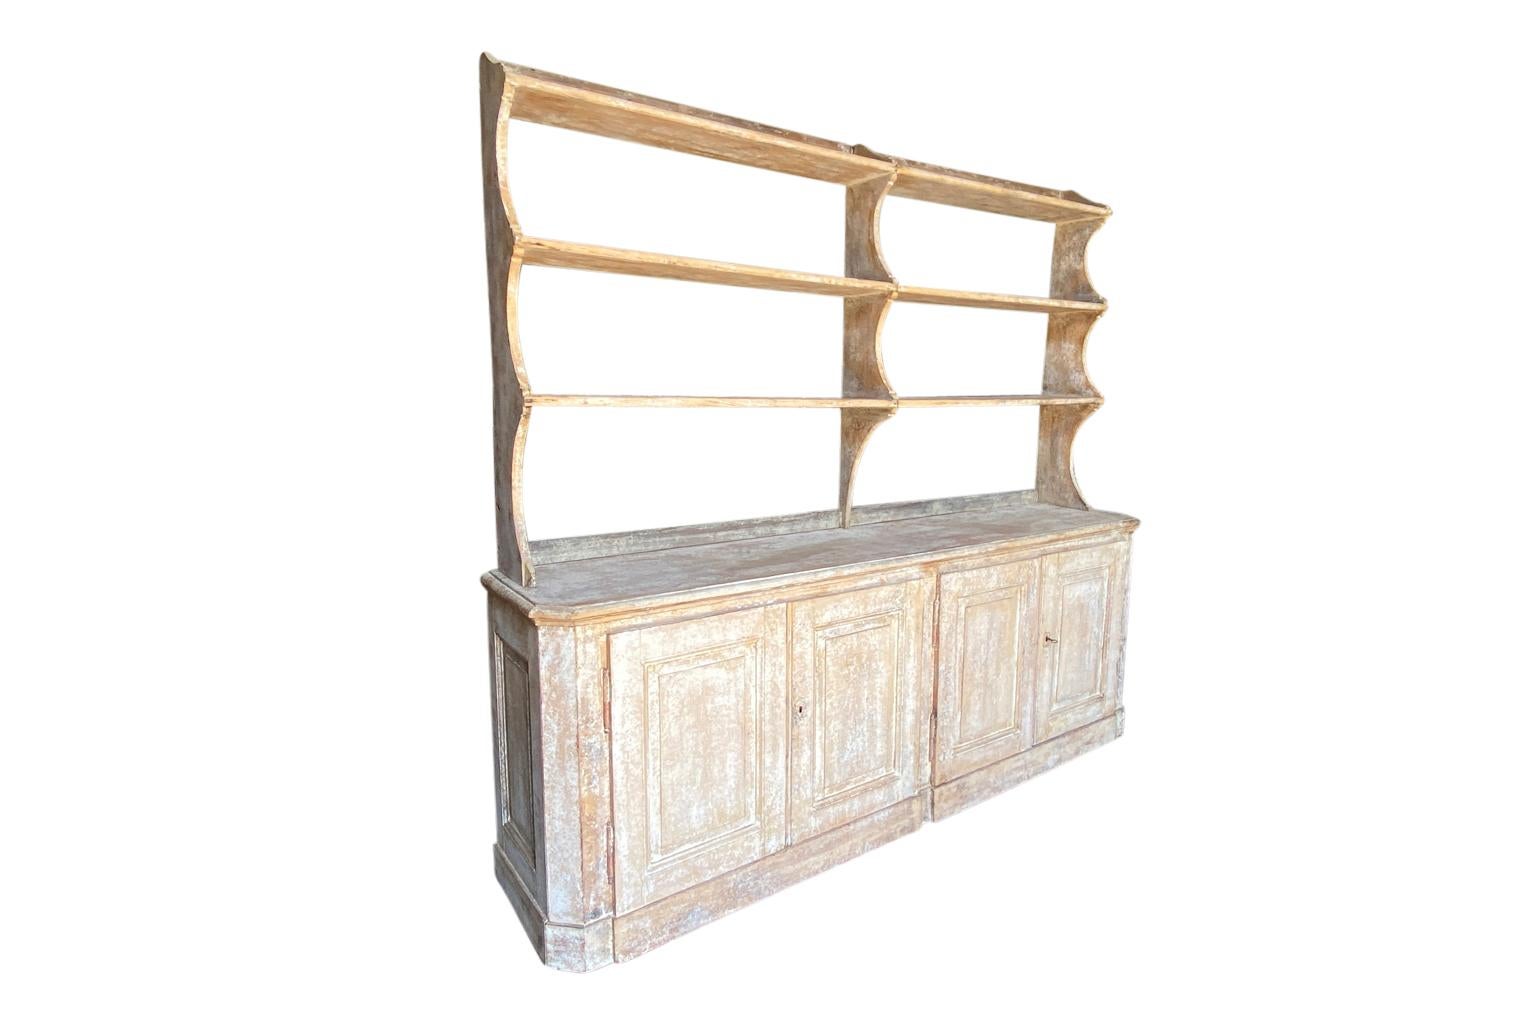 A charming mid-19th century Deux corps buffet - Etagere from the South of France. Wonderfully constructed from painted wood with four doors and open shelving. A wonderful storage and display piece, perfect for a kitchen, butler's pantry or living